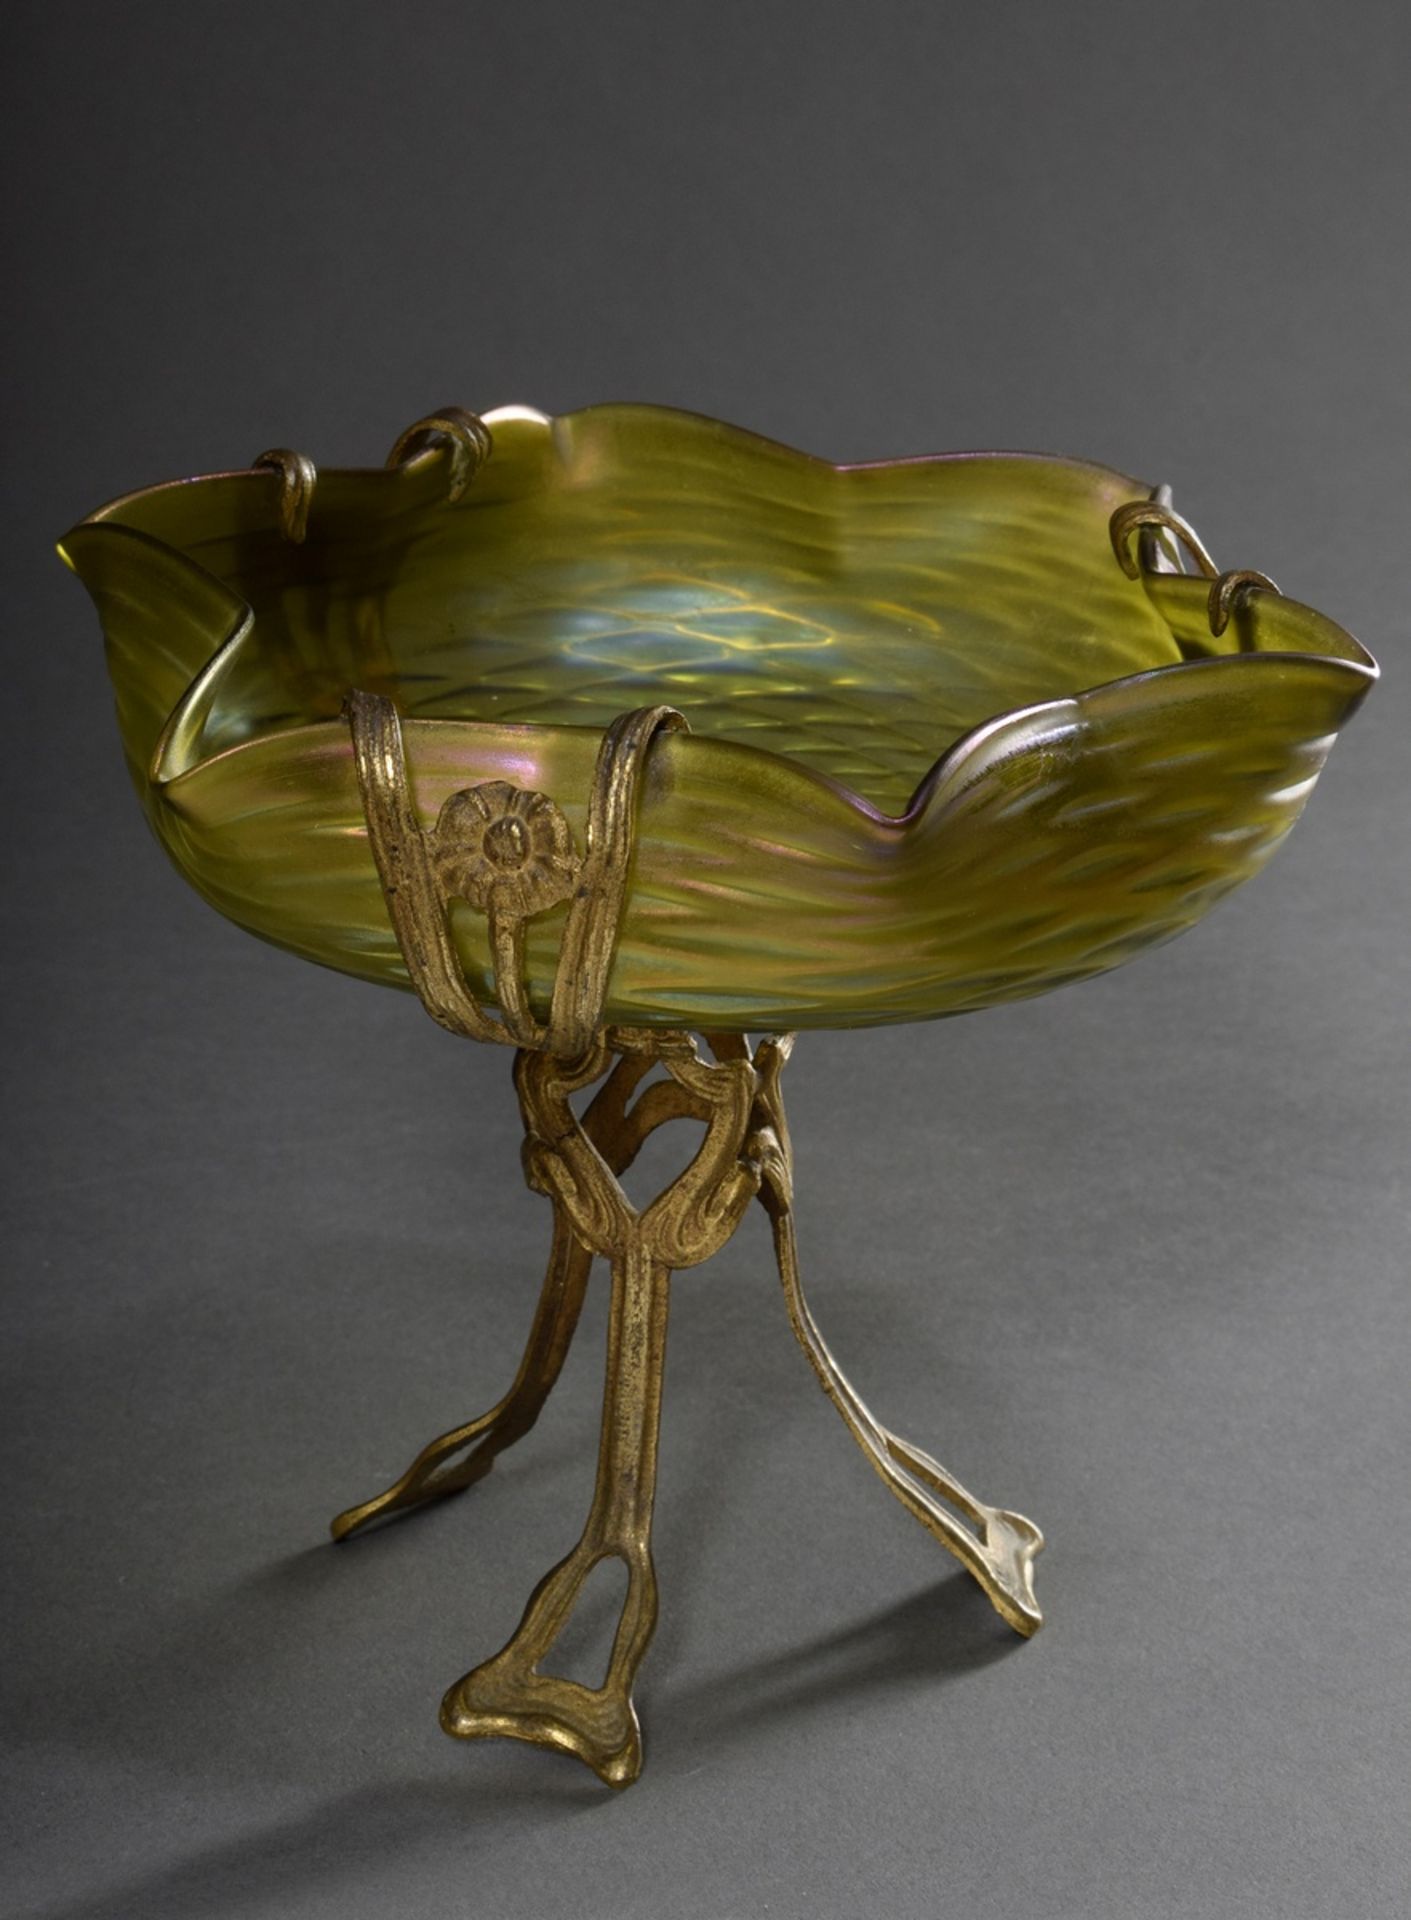 Art nouveau top with fire-gilt zinc cast frame and light green to yellowish iridescent glass bowl i - Image 2 of 5